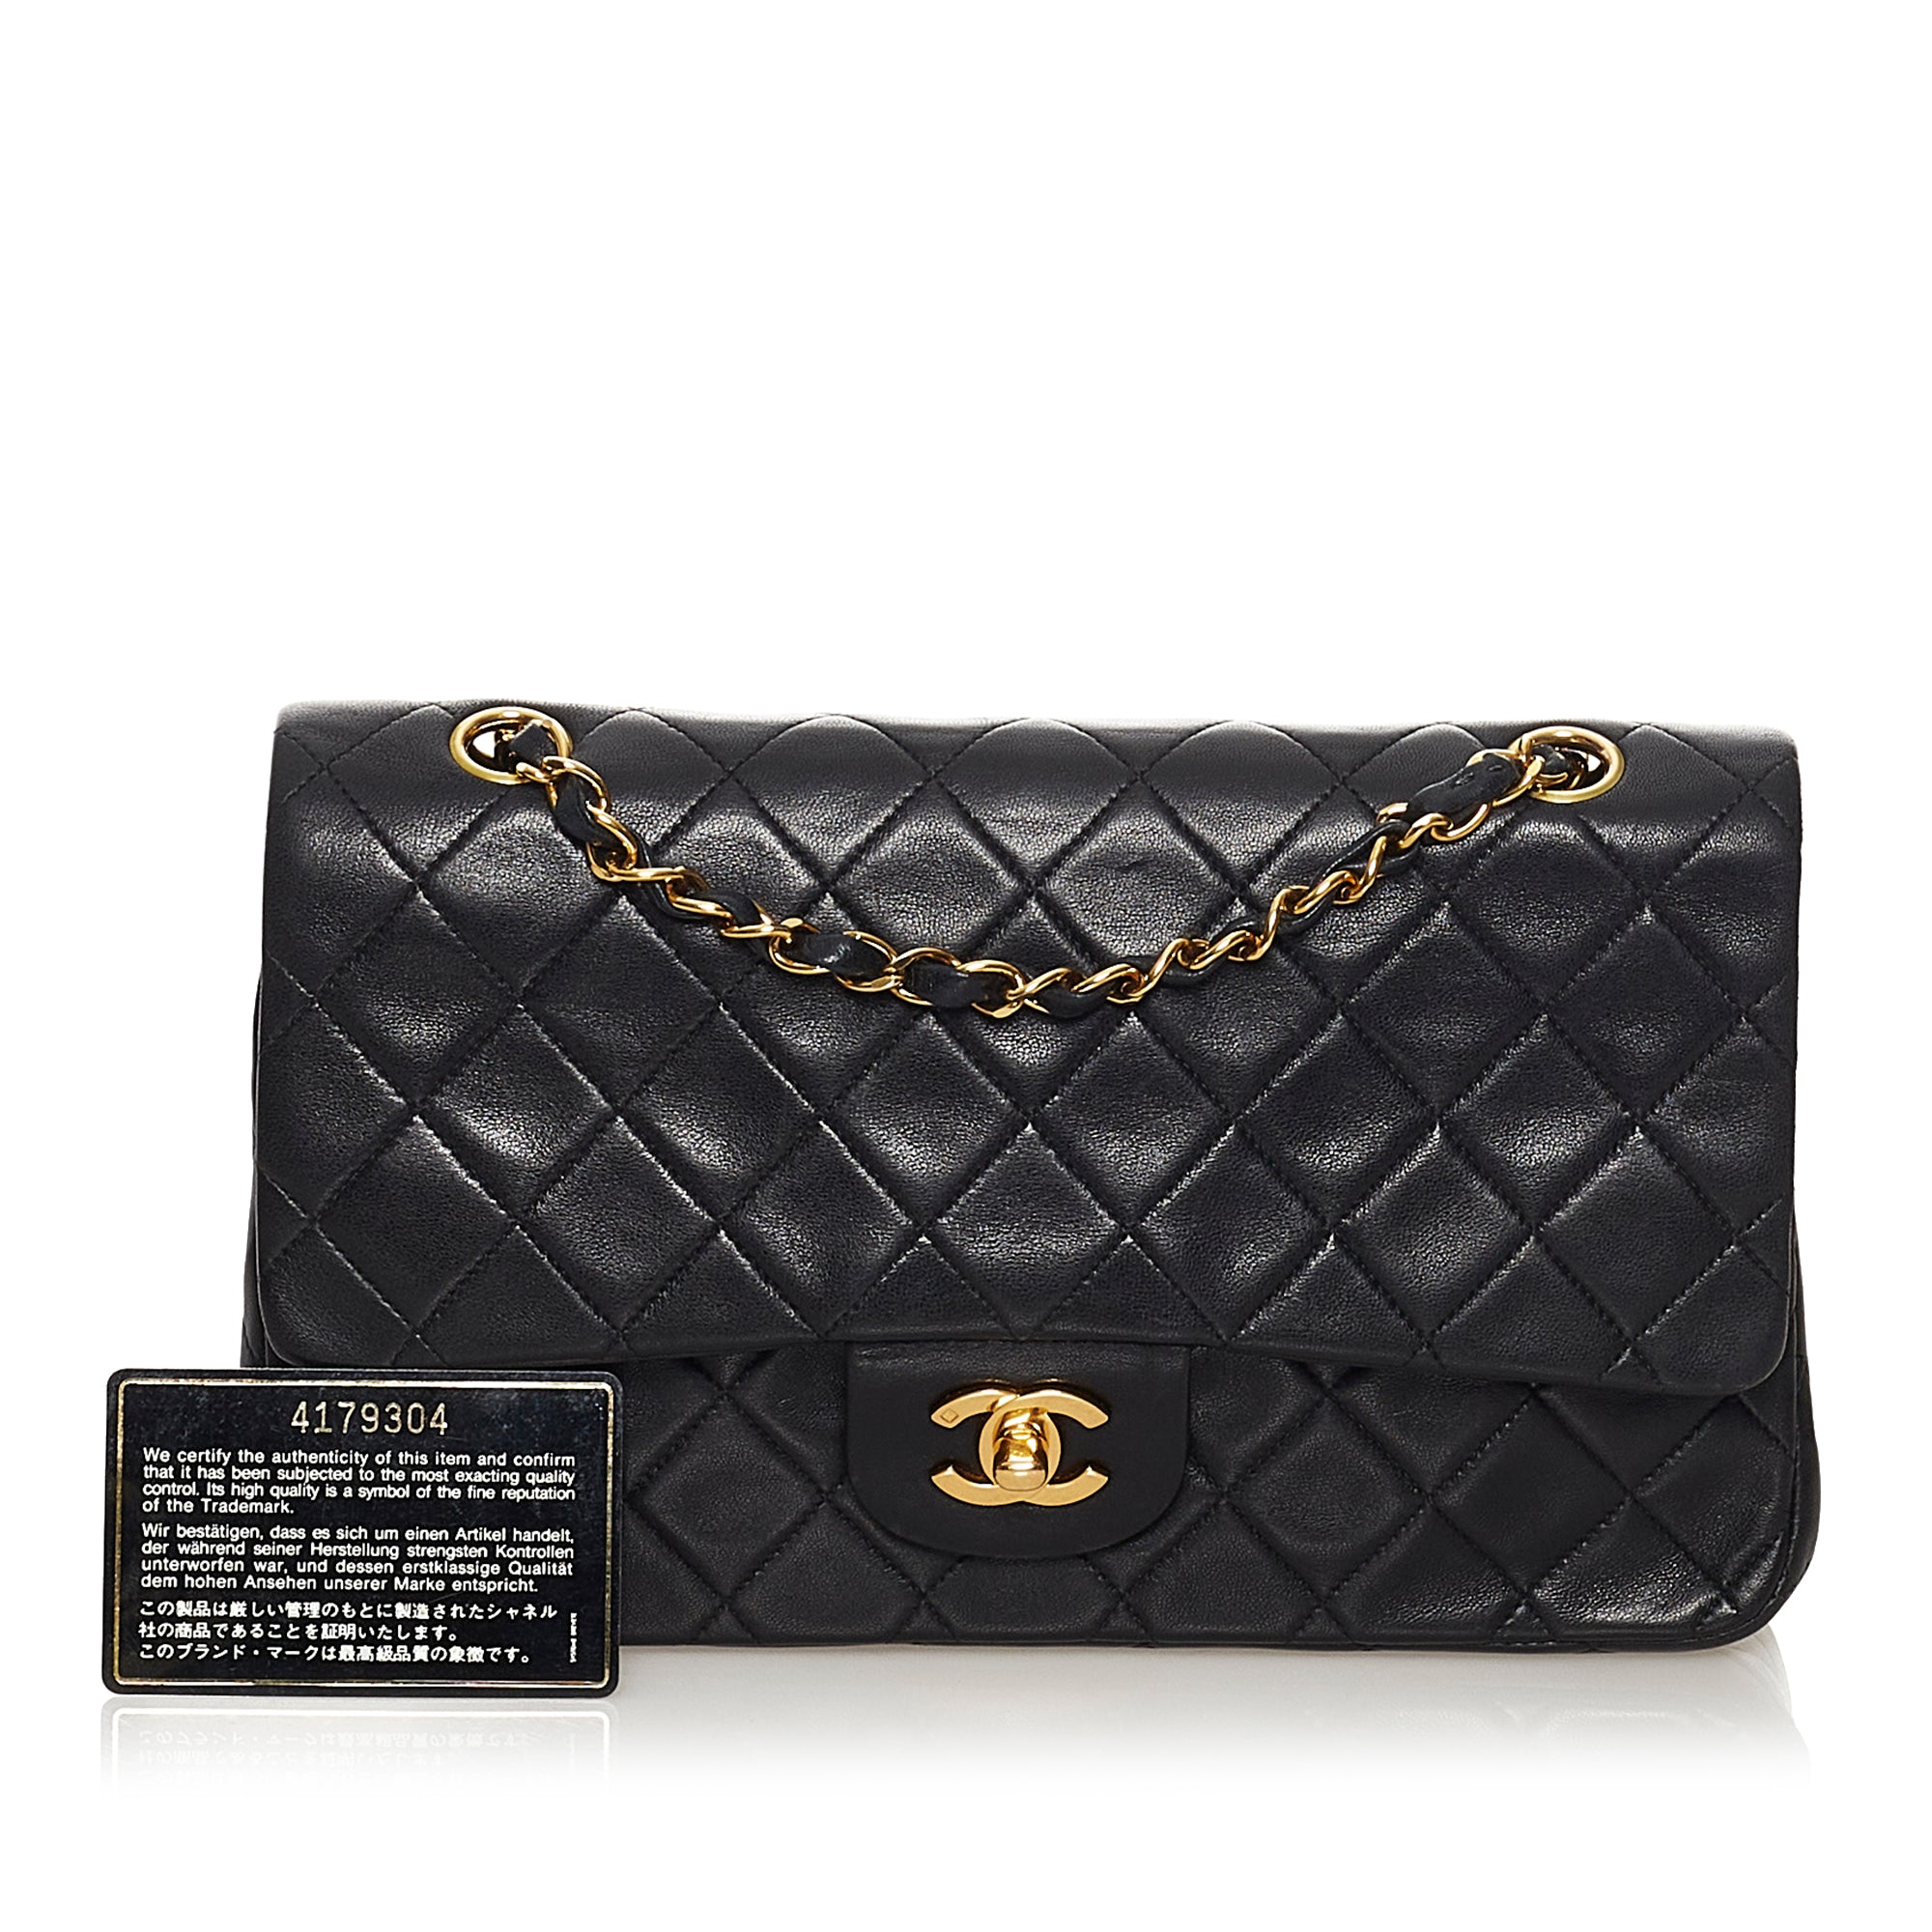 CHANEL Black Lambskin Quilted Leather 24K Gold Plated Shoulder